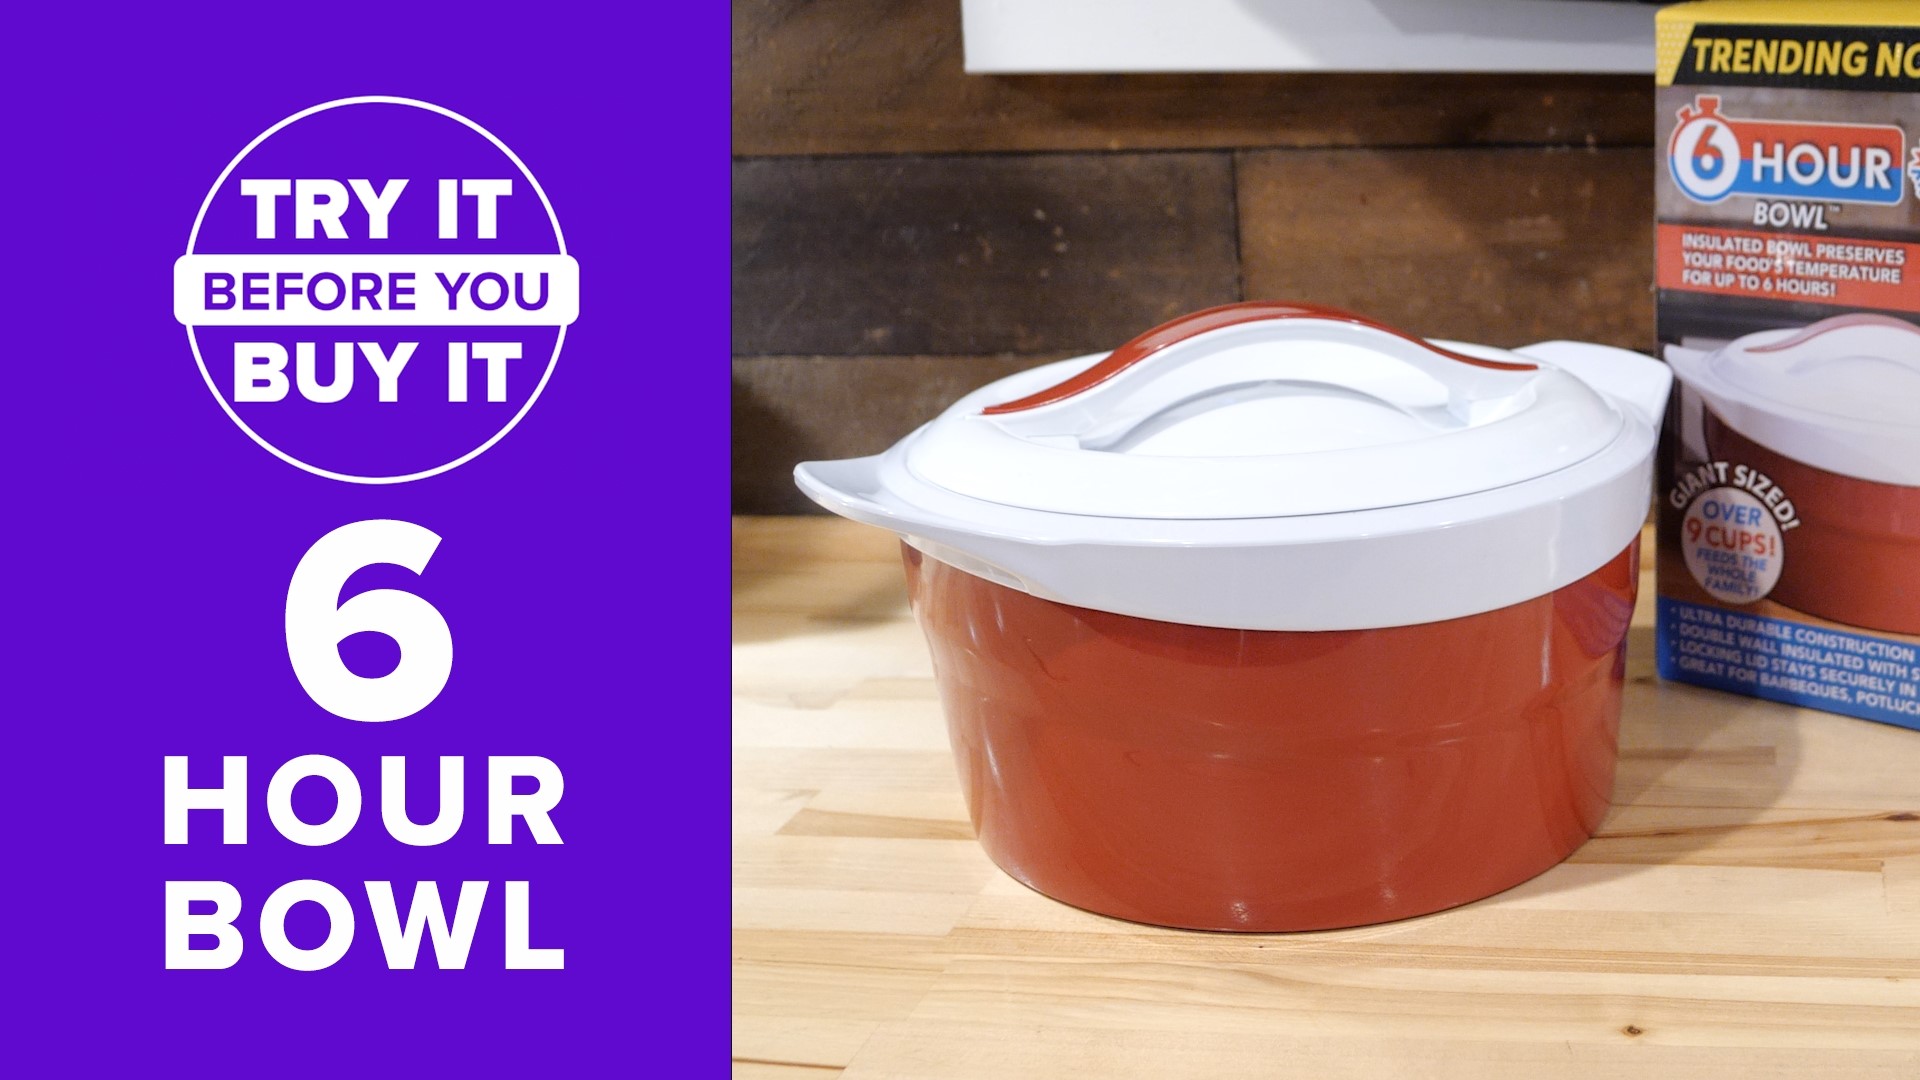 We find out if an insulated bowl keeps the temperature of your food for up to six hours.